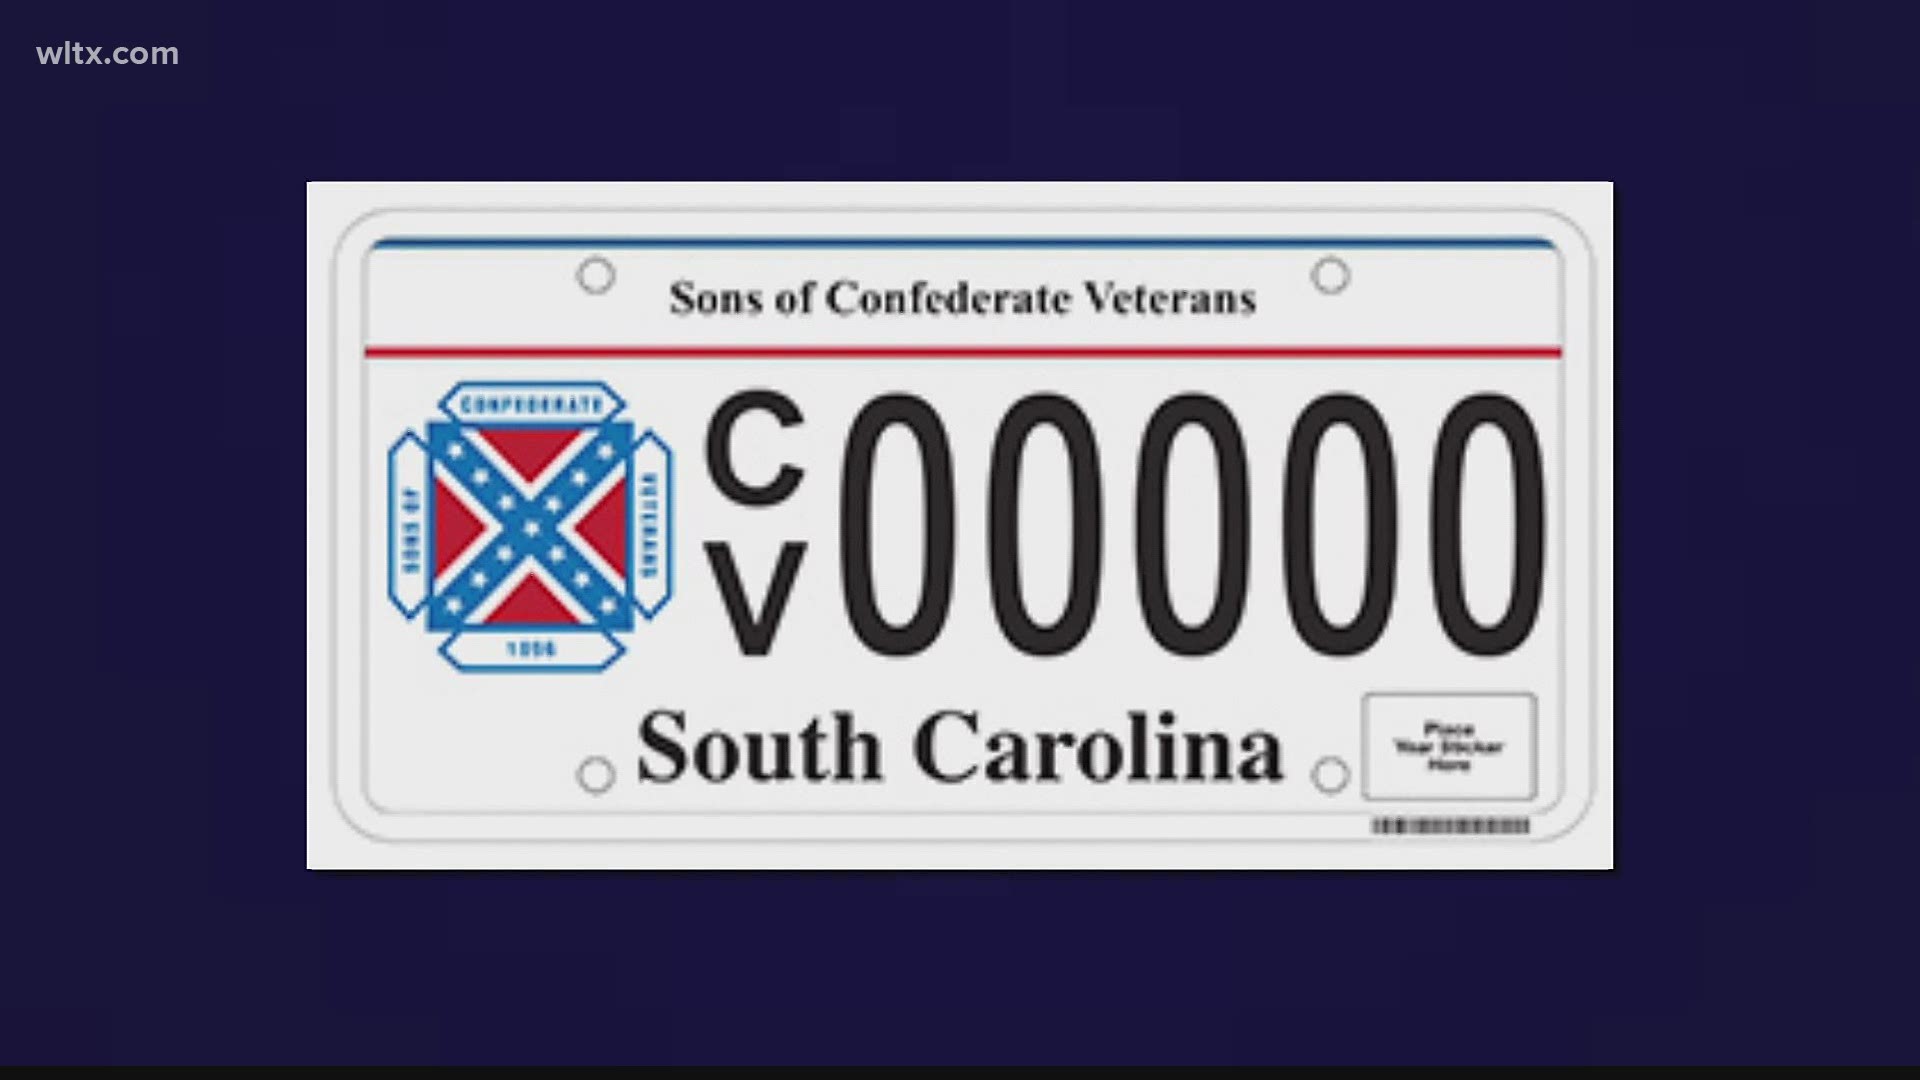 Rep. Todd Rutherford is sponsoring a bill that would stop Confederate flags from being put on state issued license plates.